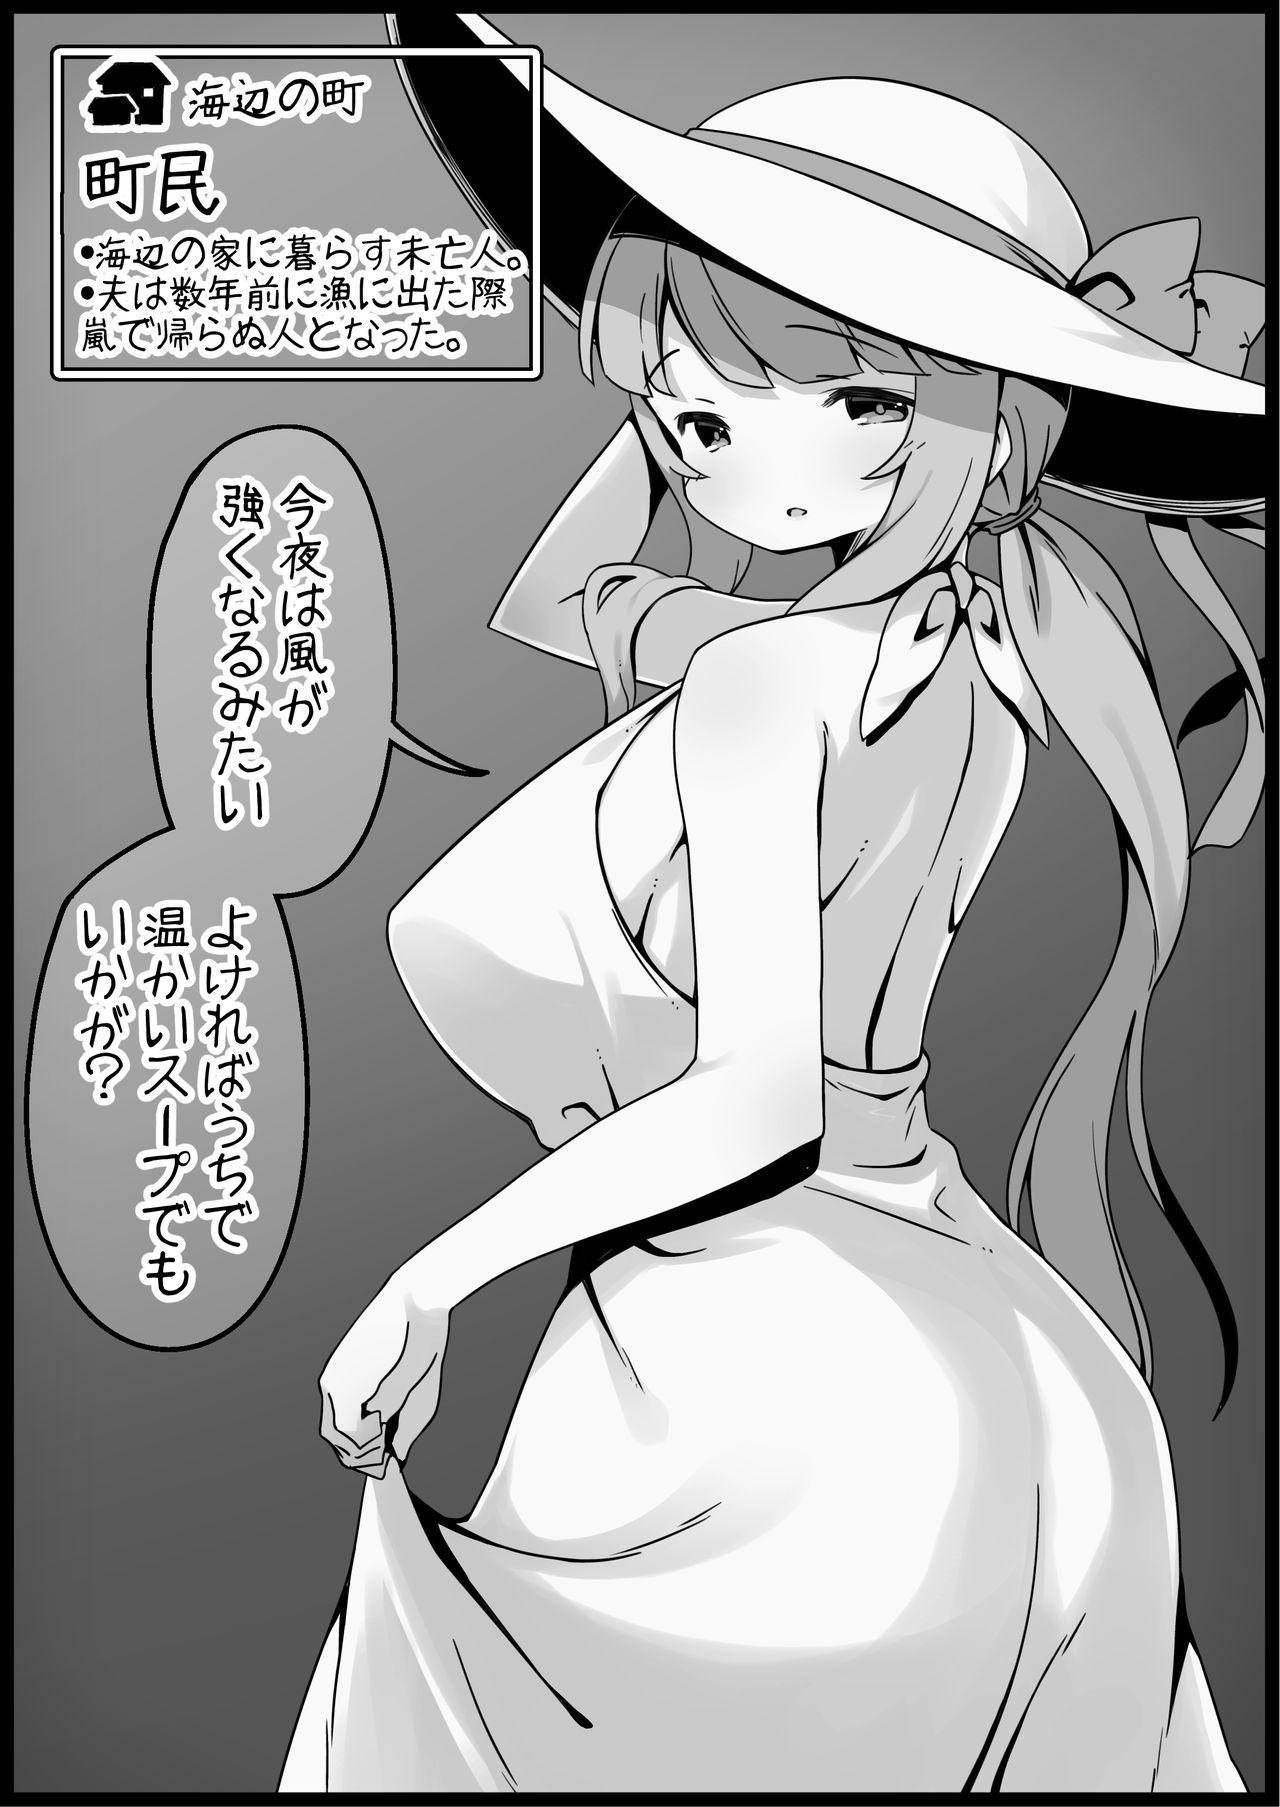 Car [Succubus Egg] Fantasy World 2 Too Forgiving to Heroes-Continued NPC (mob) Opponent-Centered Short H Manga Collection- - Original Hd Porn - Page 10